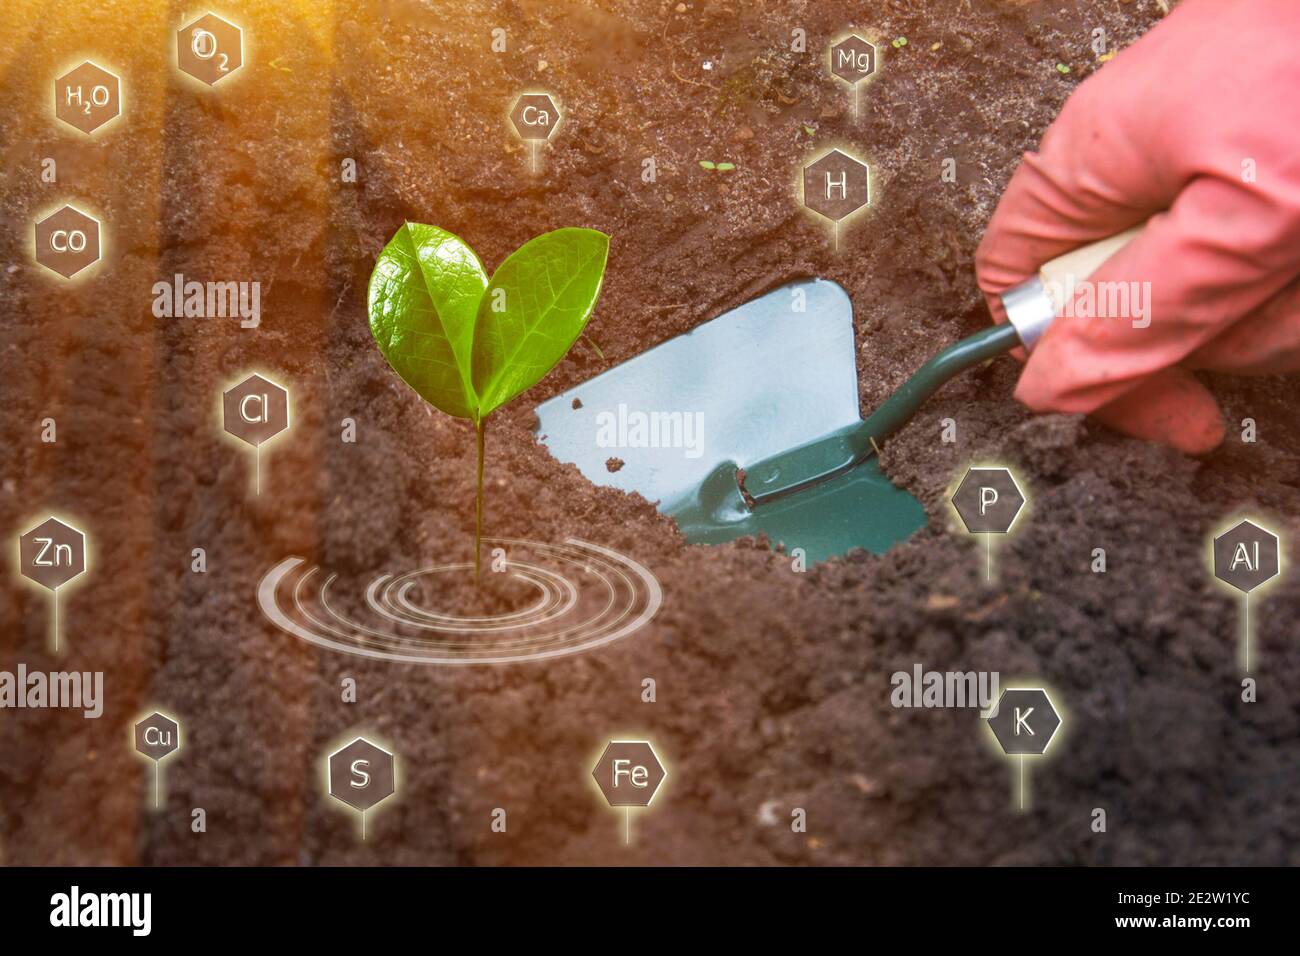 Gardener grows plant seedling. Green Shovel in hand. Nutrients for cultivated plants in soil. Concept of agricultural industry, growing organic food, Stock Photo